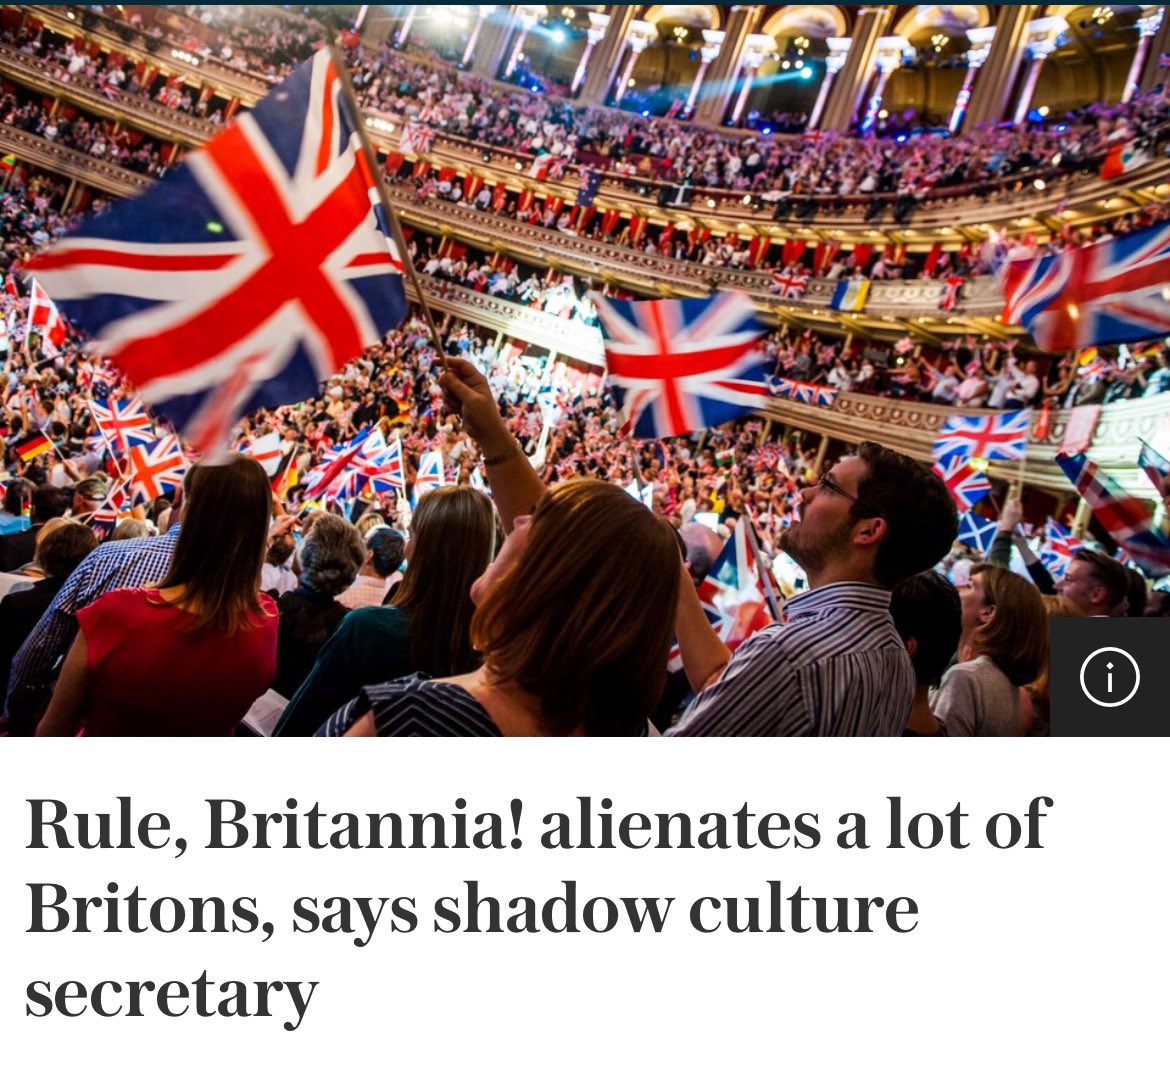 Labour: Puts pressure on BBC to stop performing Rule, Britannia! Conservatives: Please don’t do that. Labour: The Tories are at it again with their obsession with culture wars.